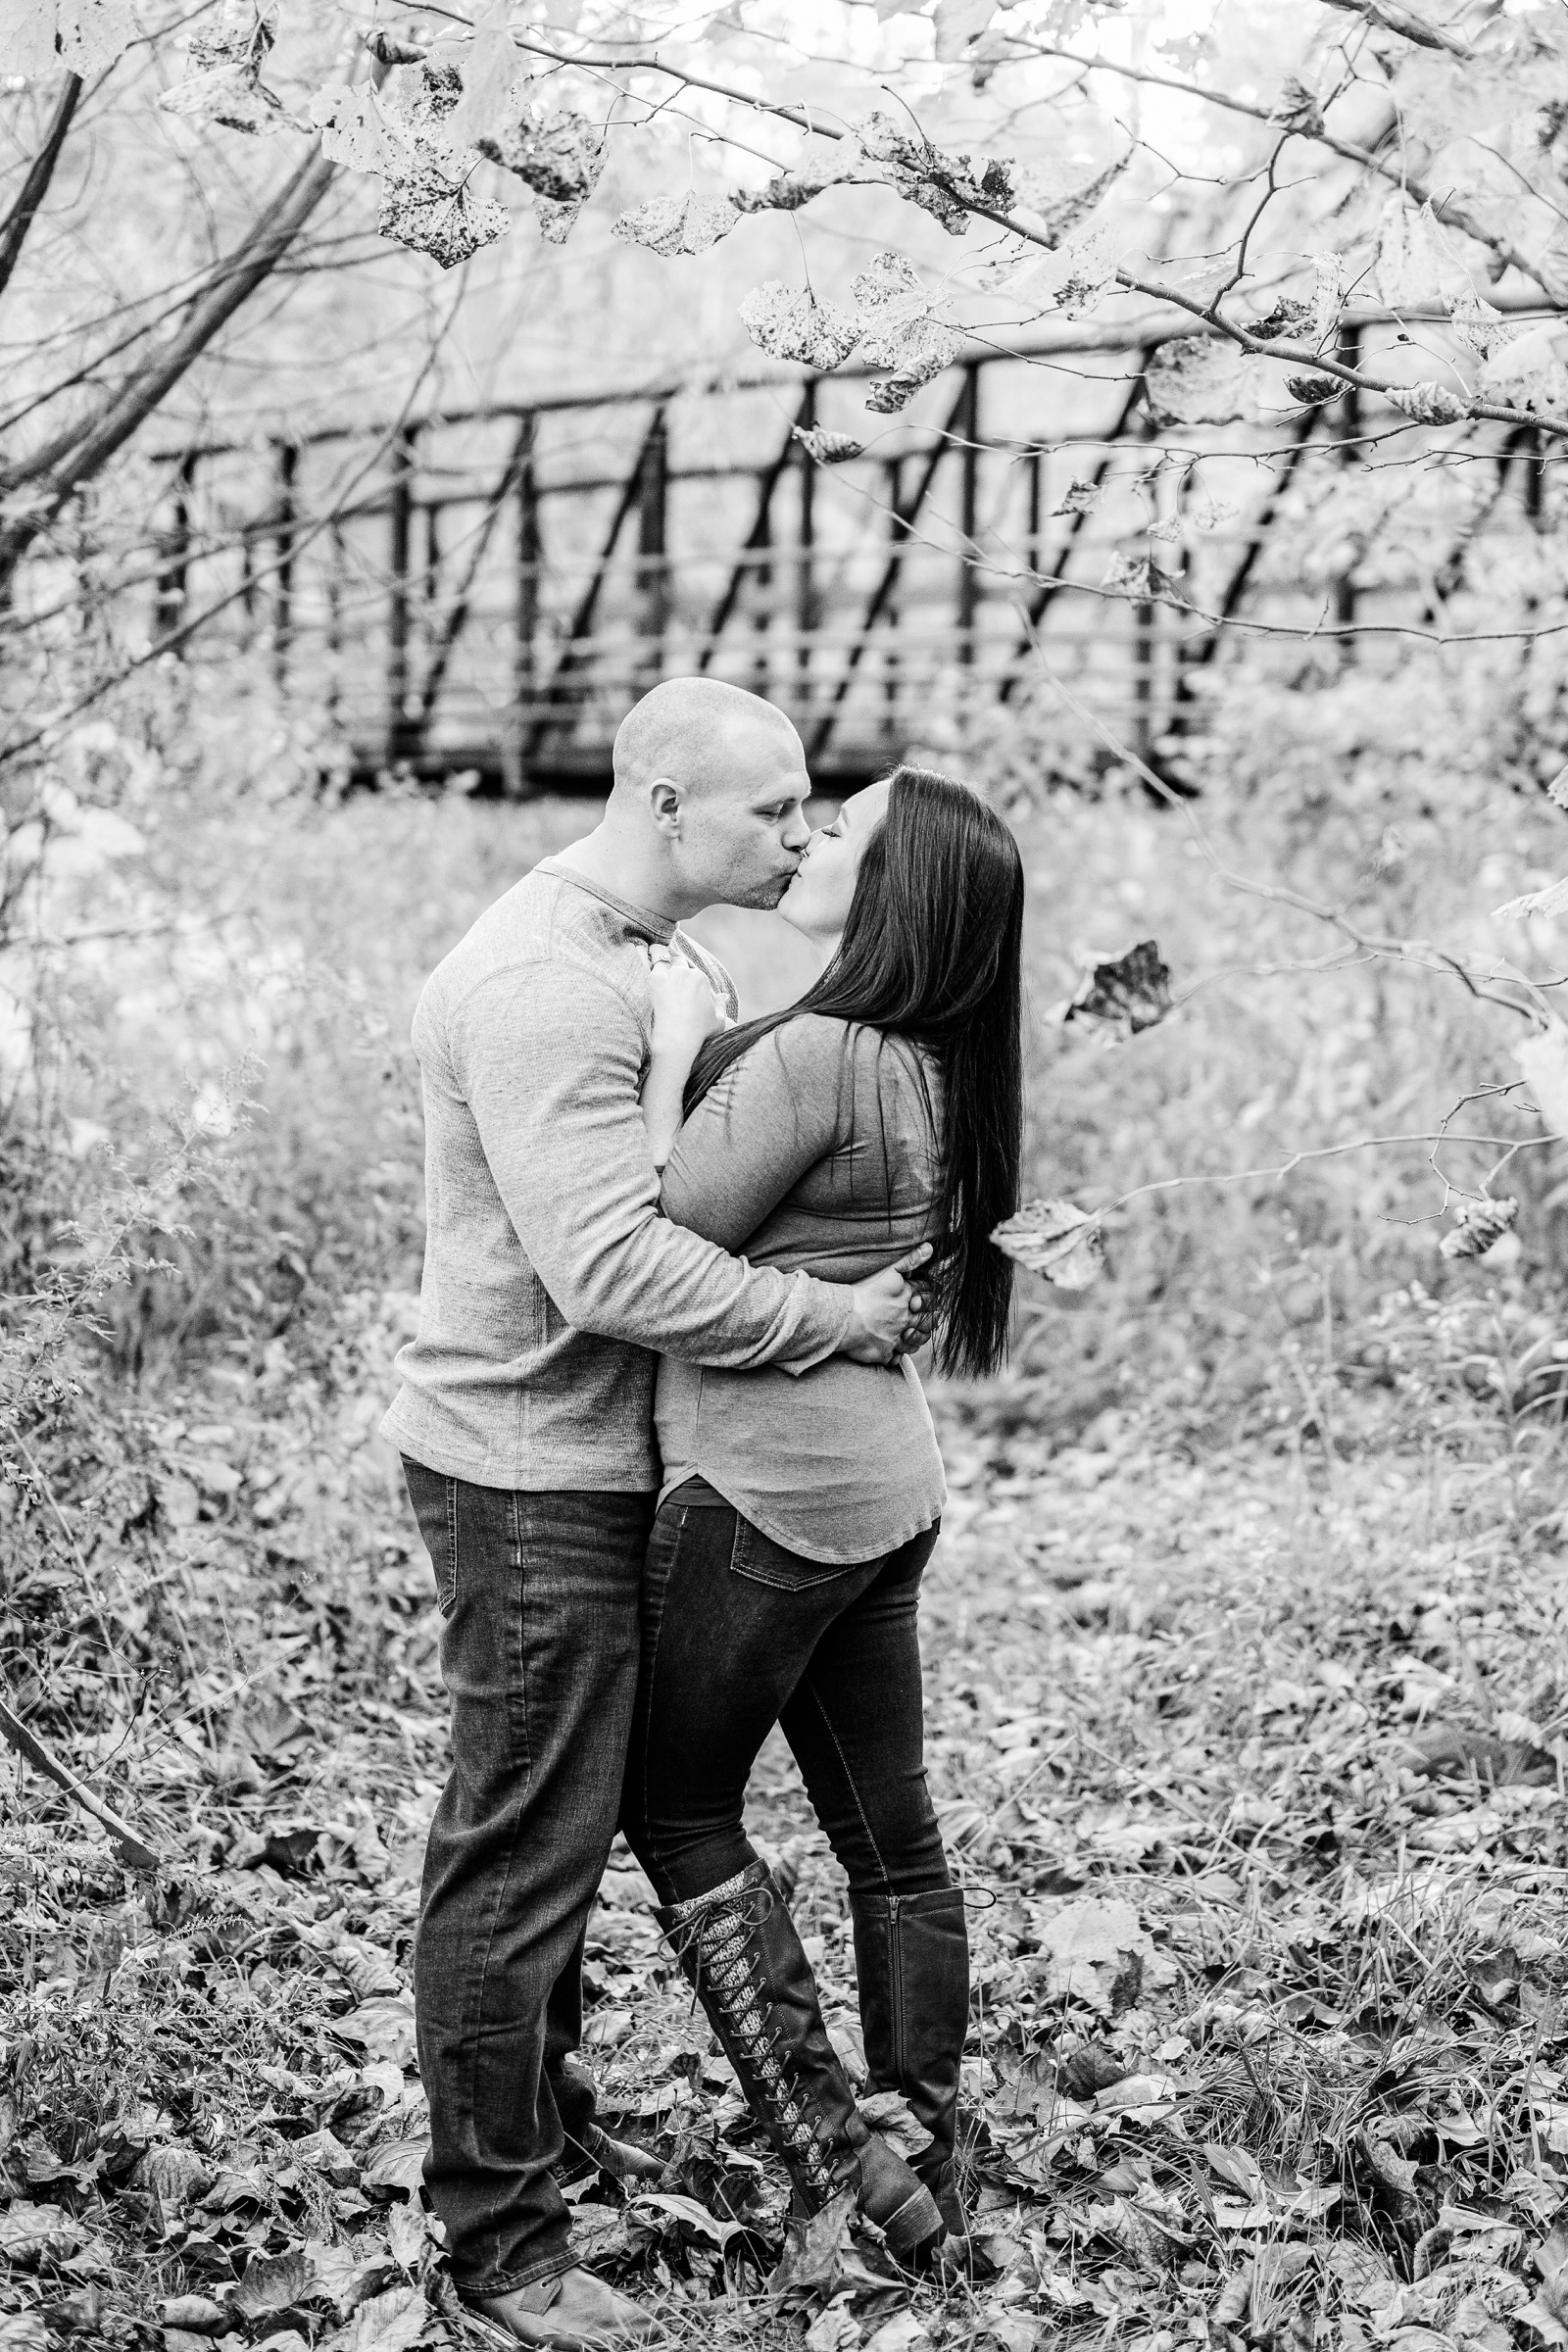 Fall Engagement Session at Station Road Bridge in Brecksville Ohio